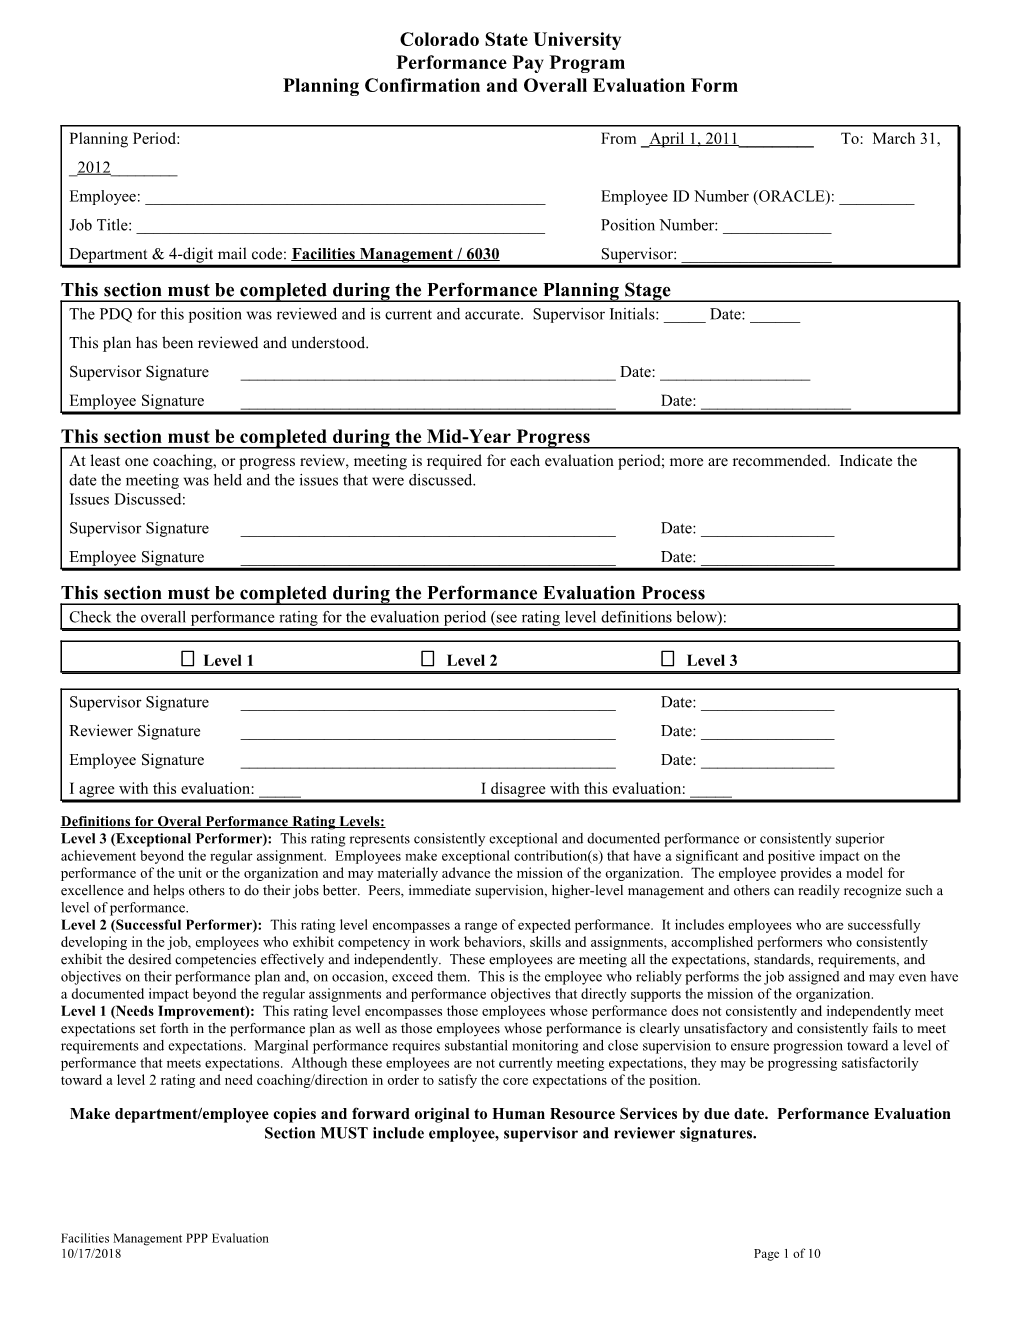 Planning and Evaluation Form